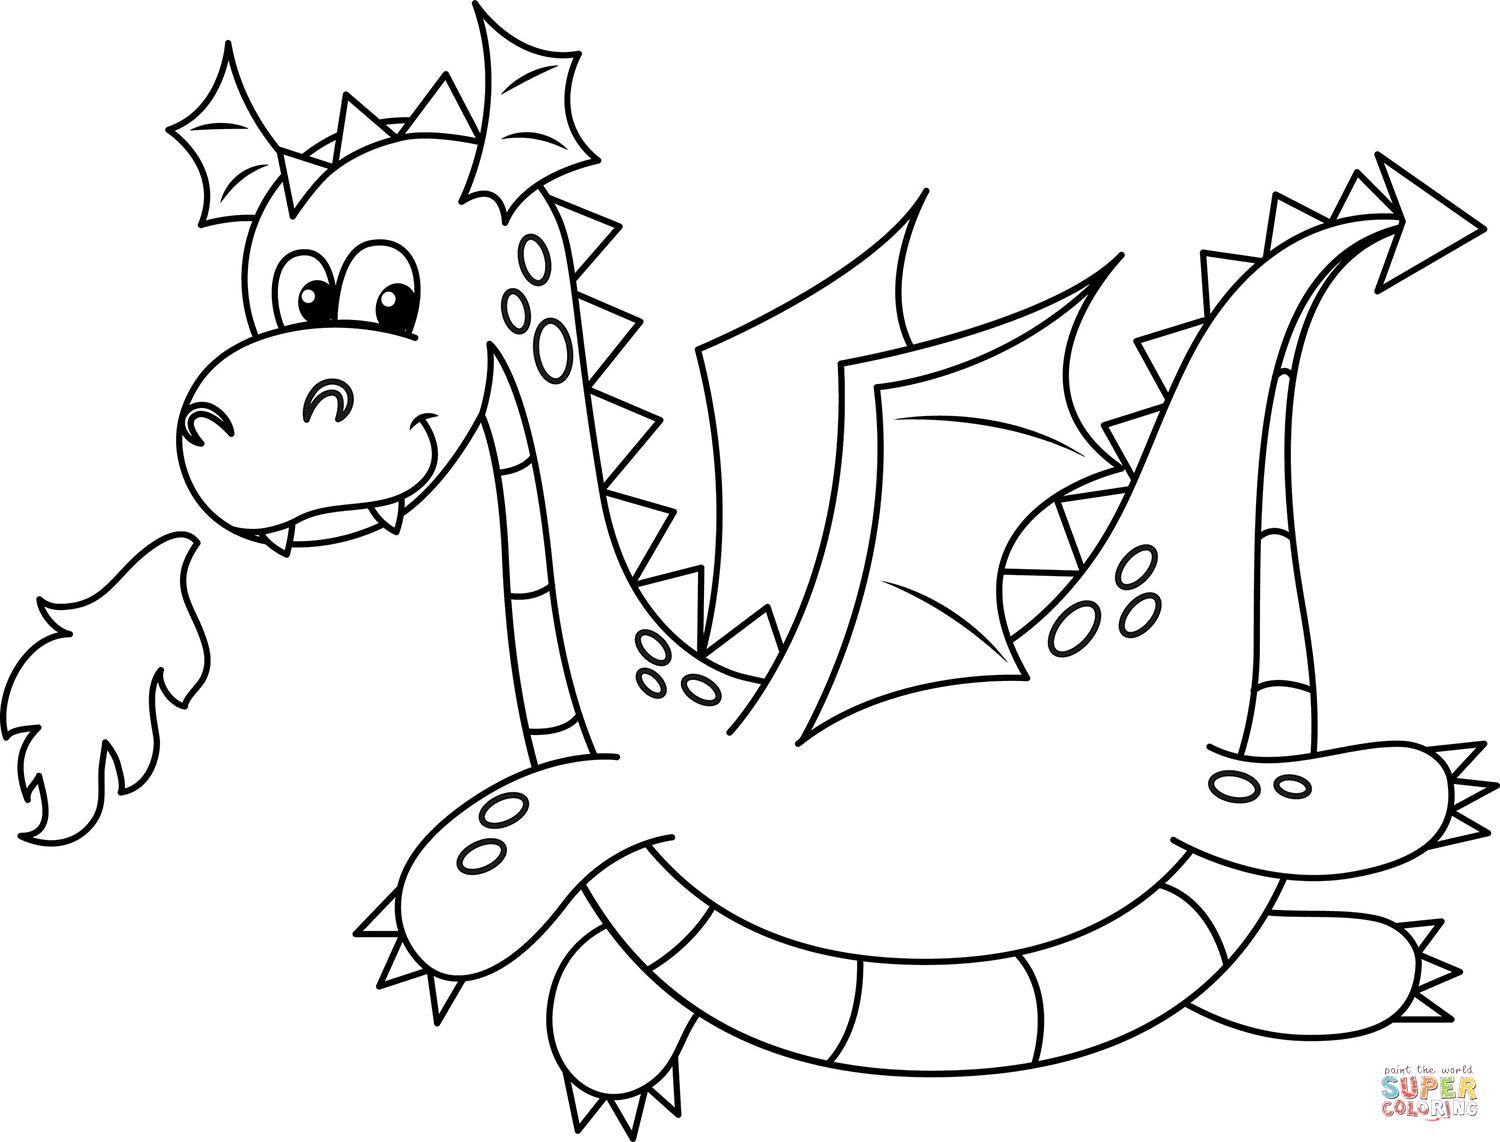 Cute Dragon coloring page | Free Printable Coloring Pages